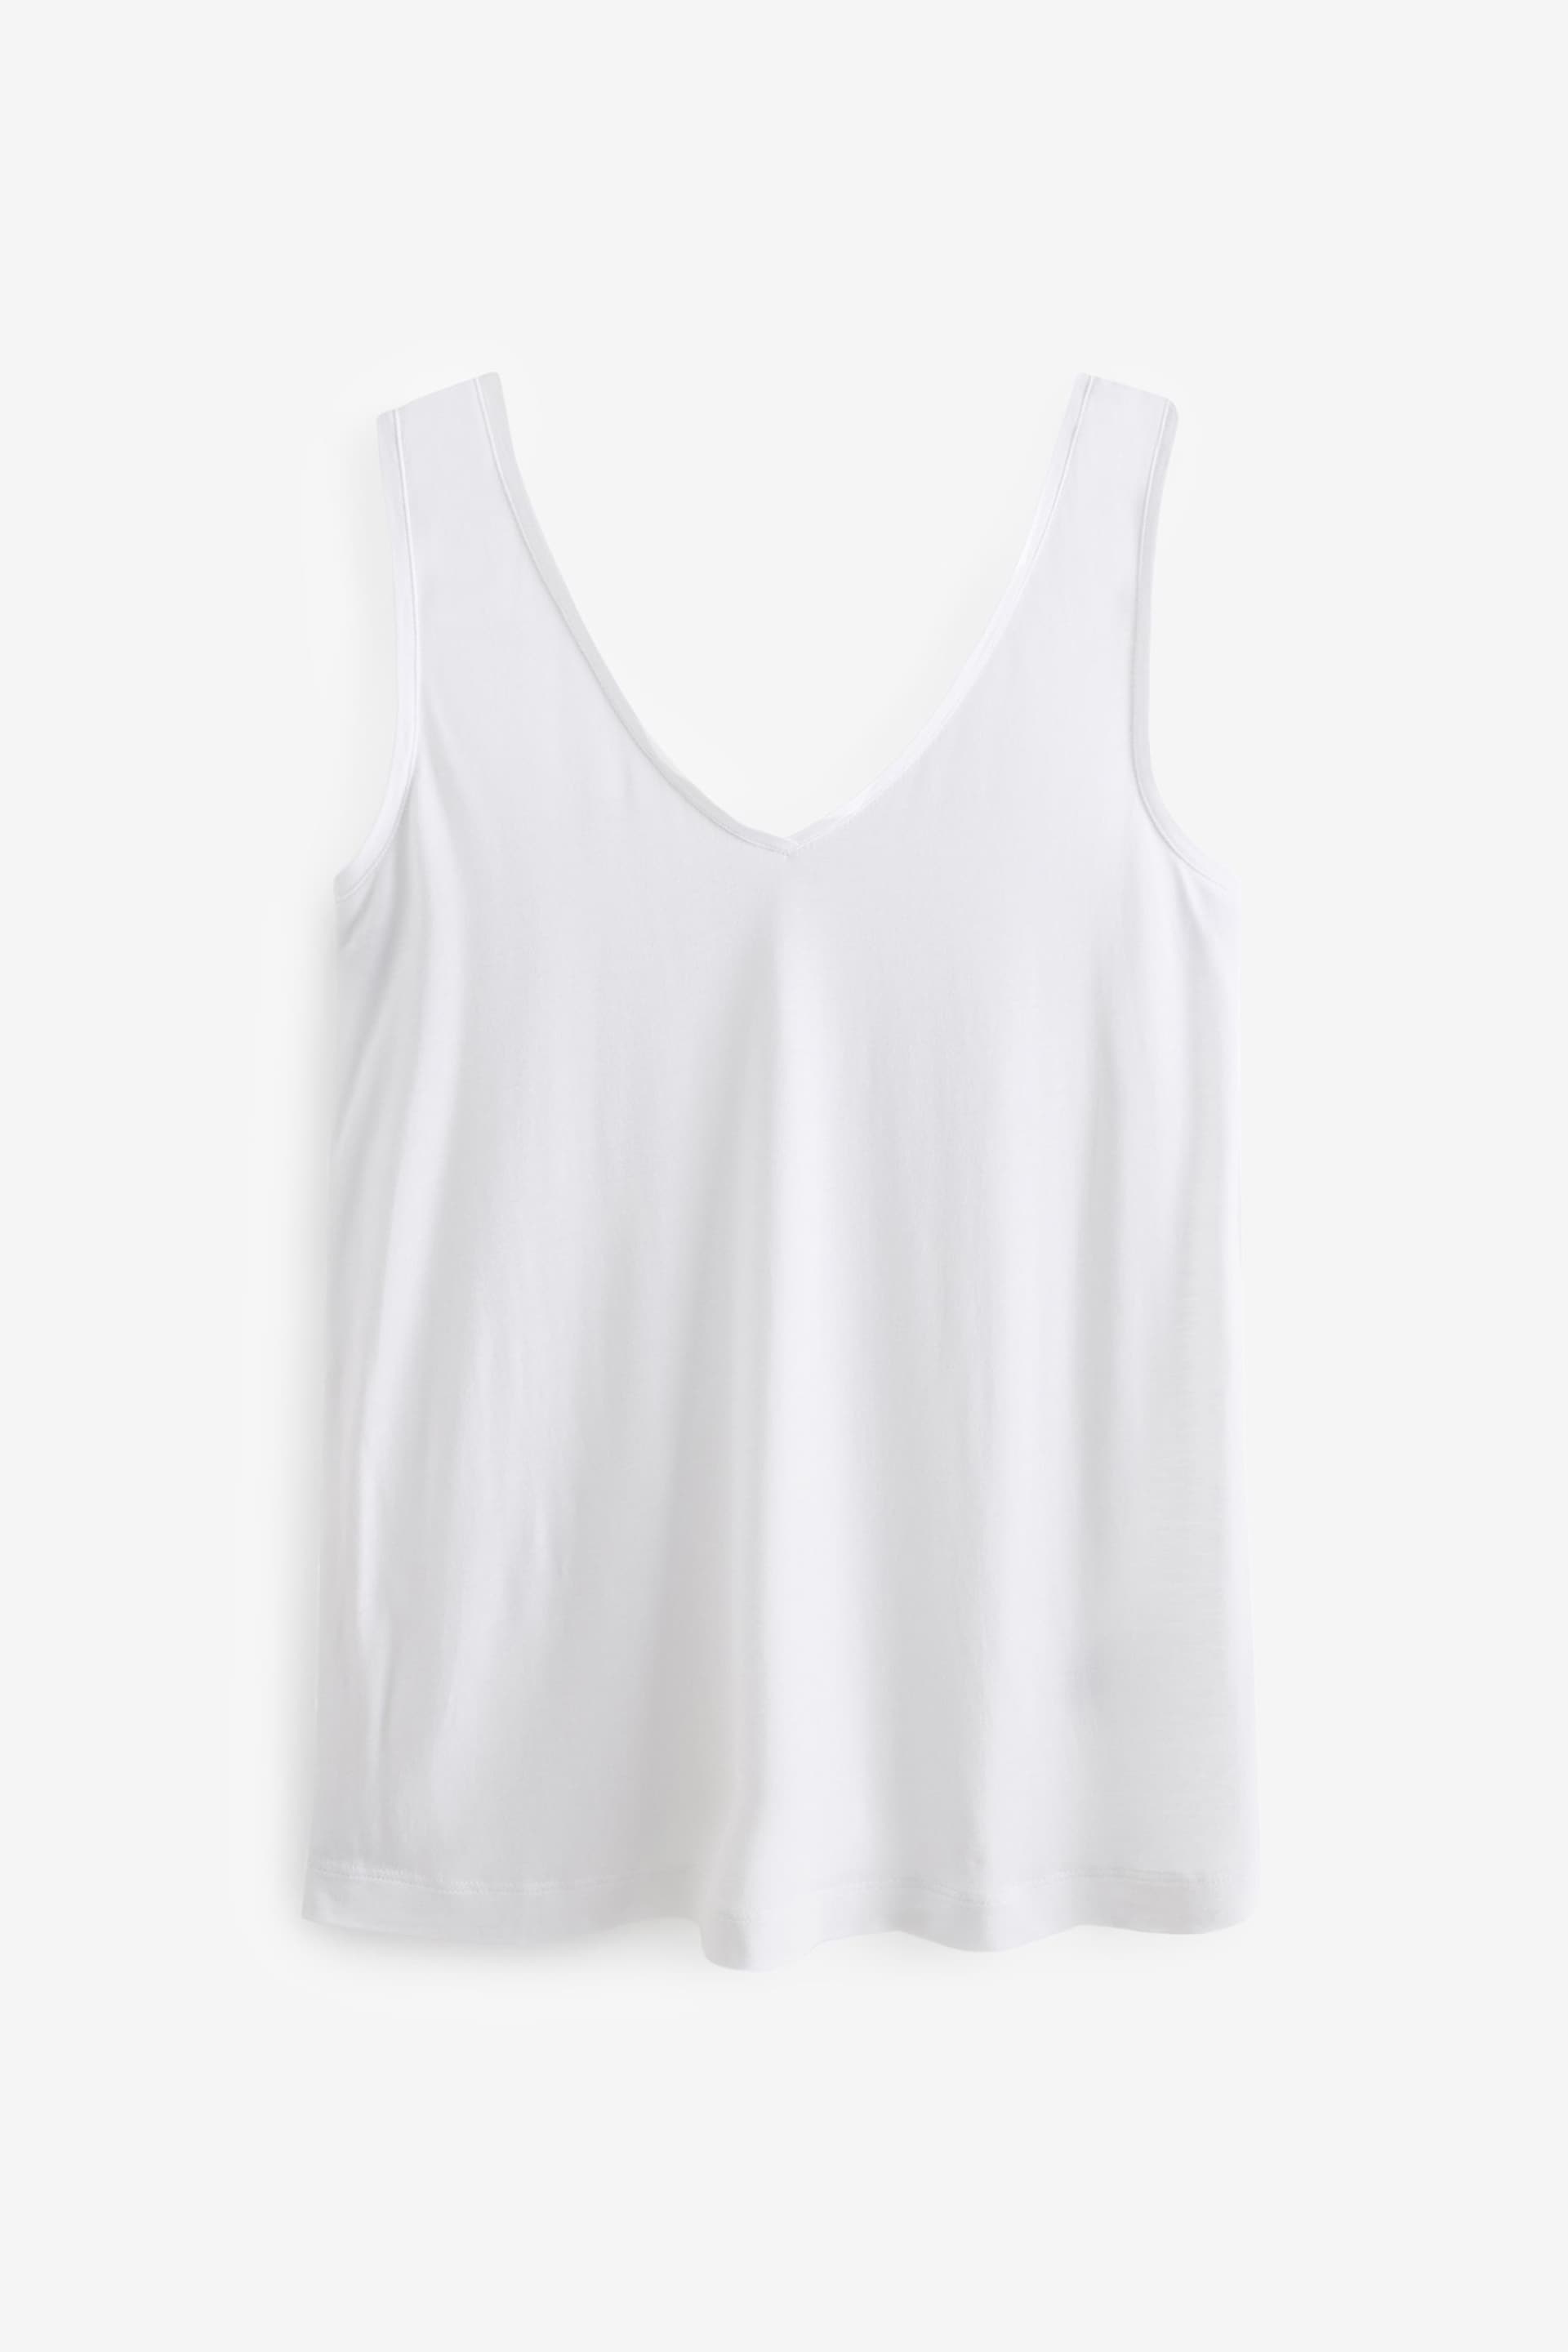 Multi Sleeveless Slouch Vests 3 Pack - Image 7 of 9